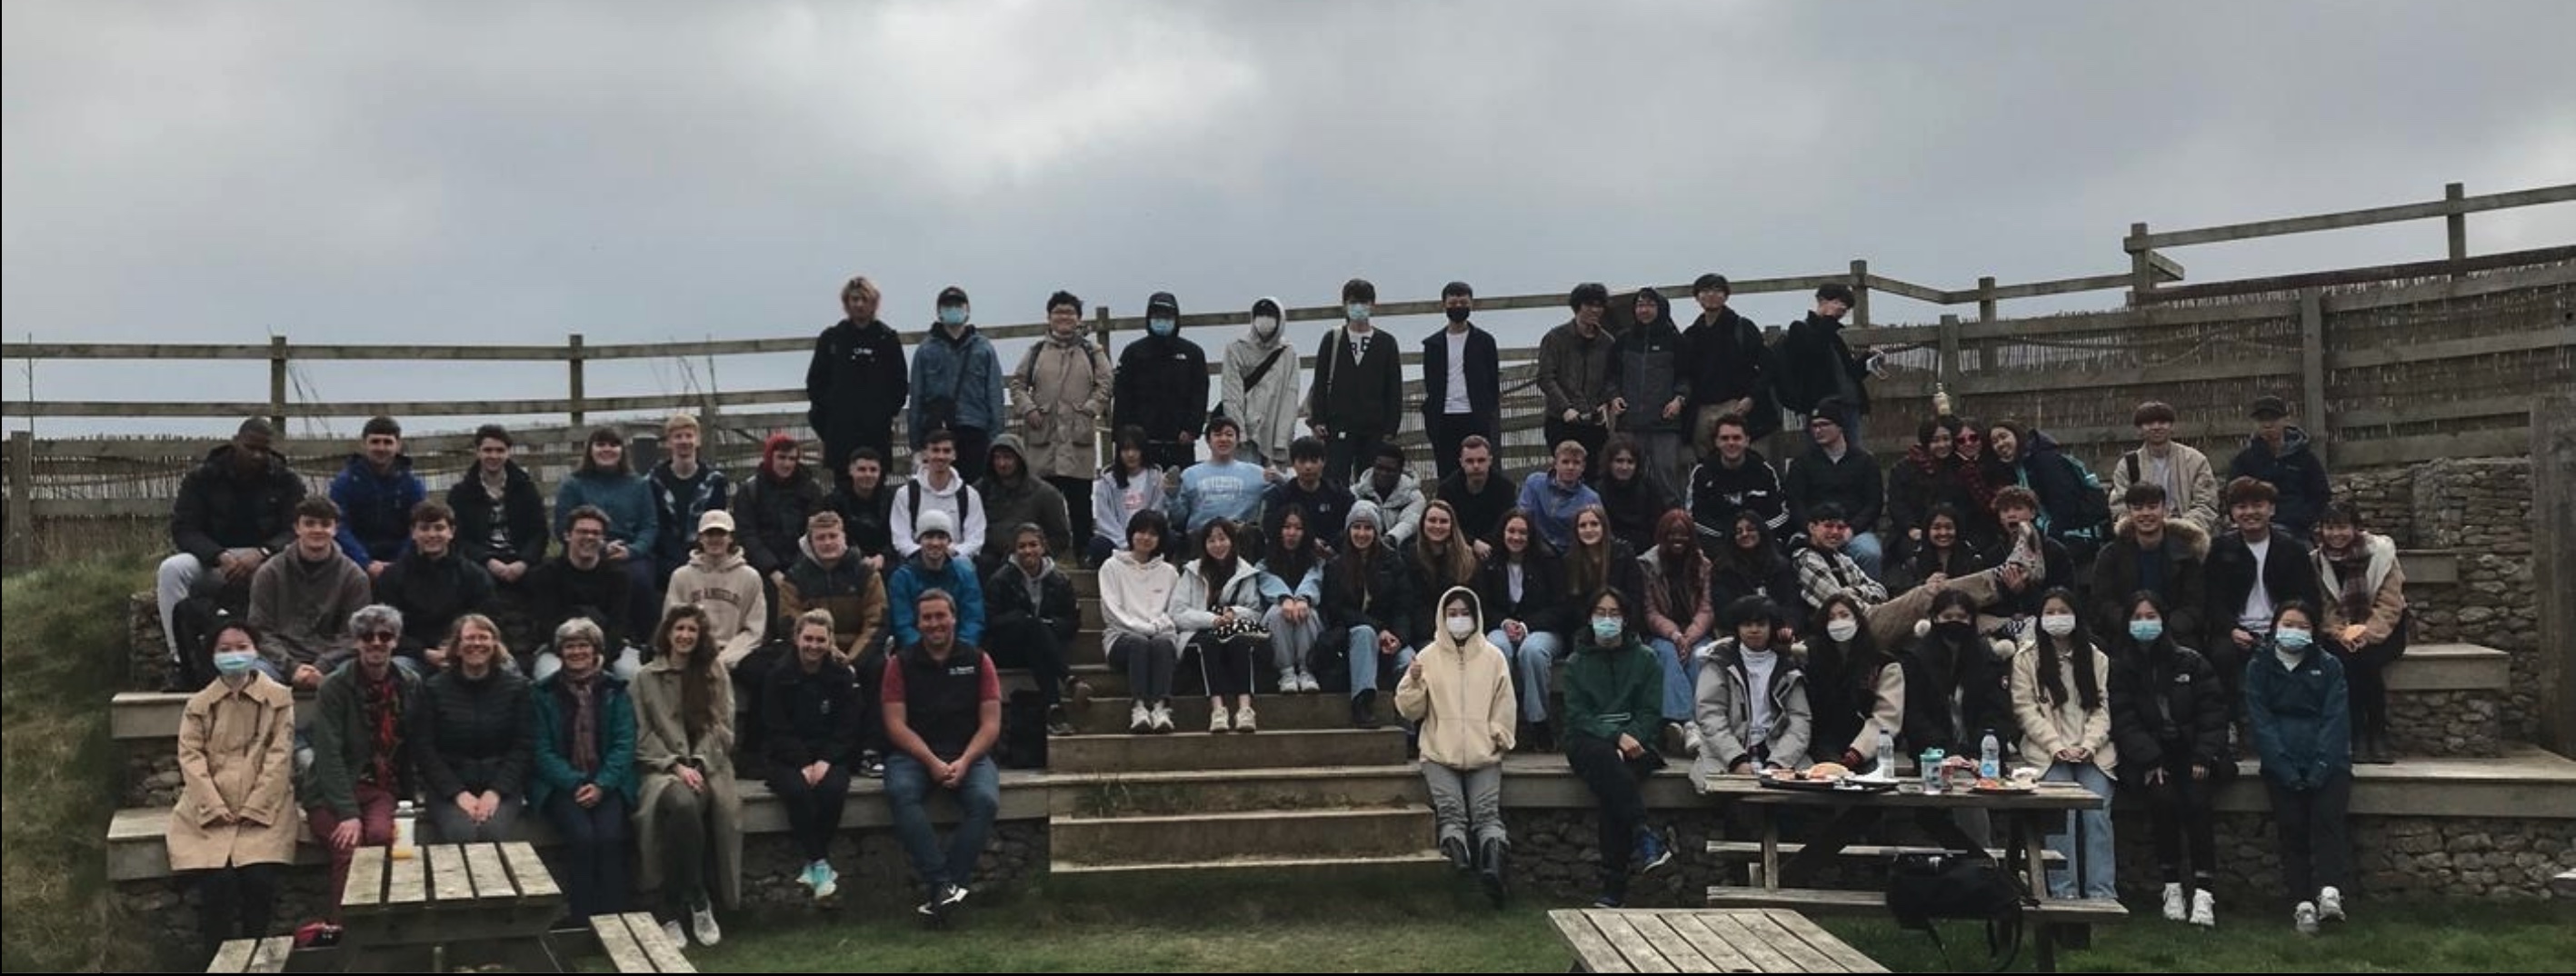 Group picture at Spurn Discovery Centre & Yorkshire Wildlife Trust